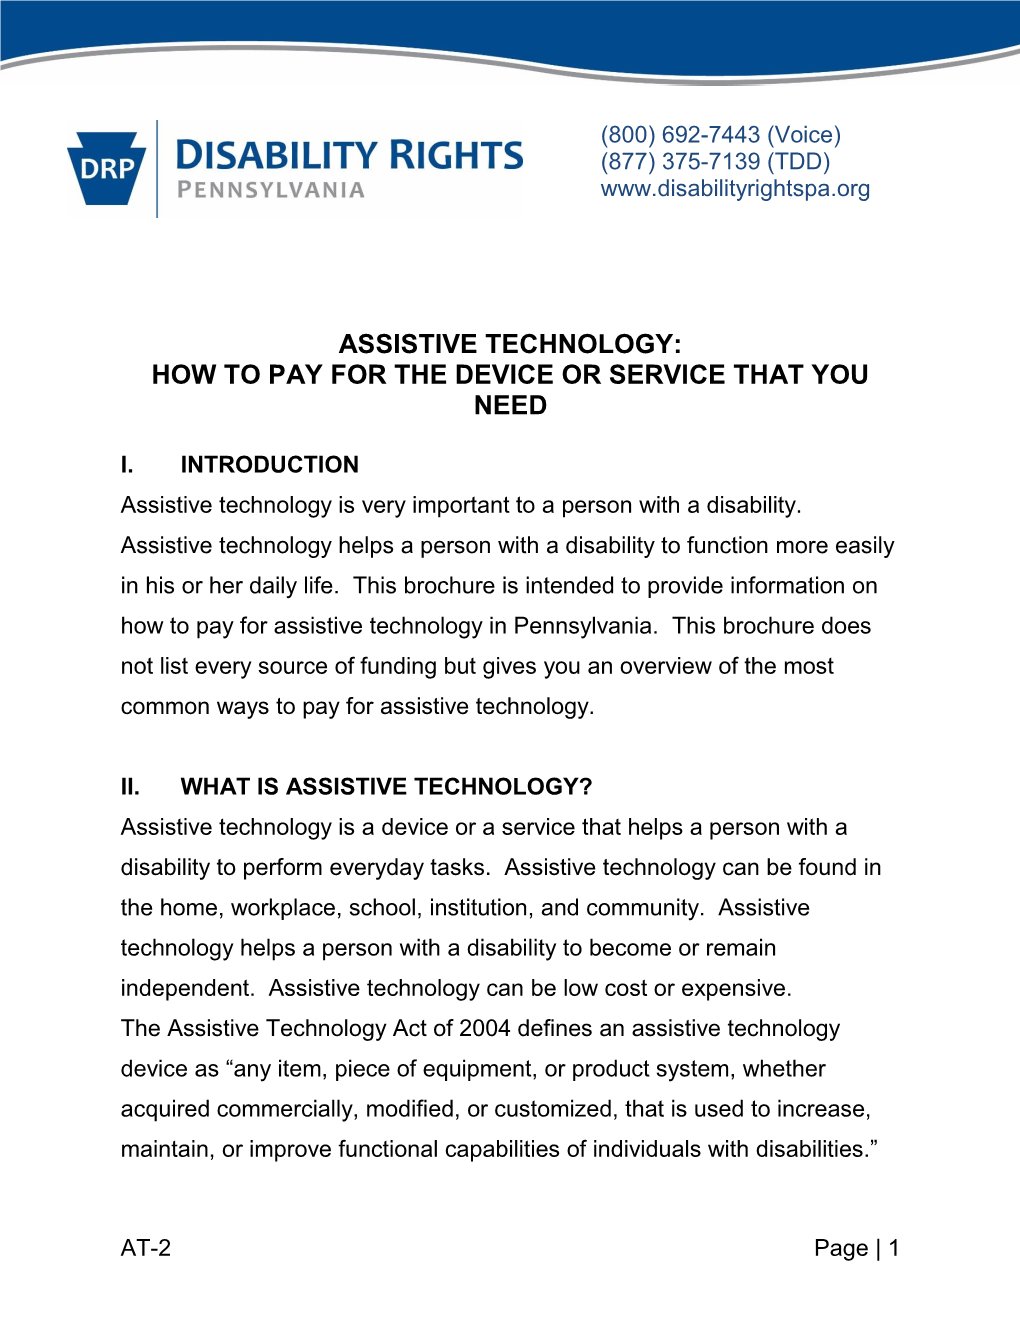 Assistive Technology: How to Pay for the Device Or Service You Need